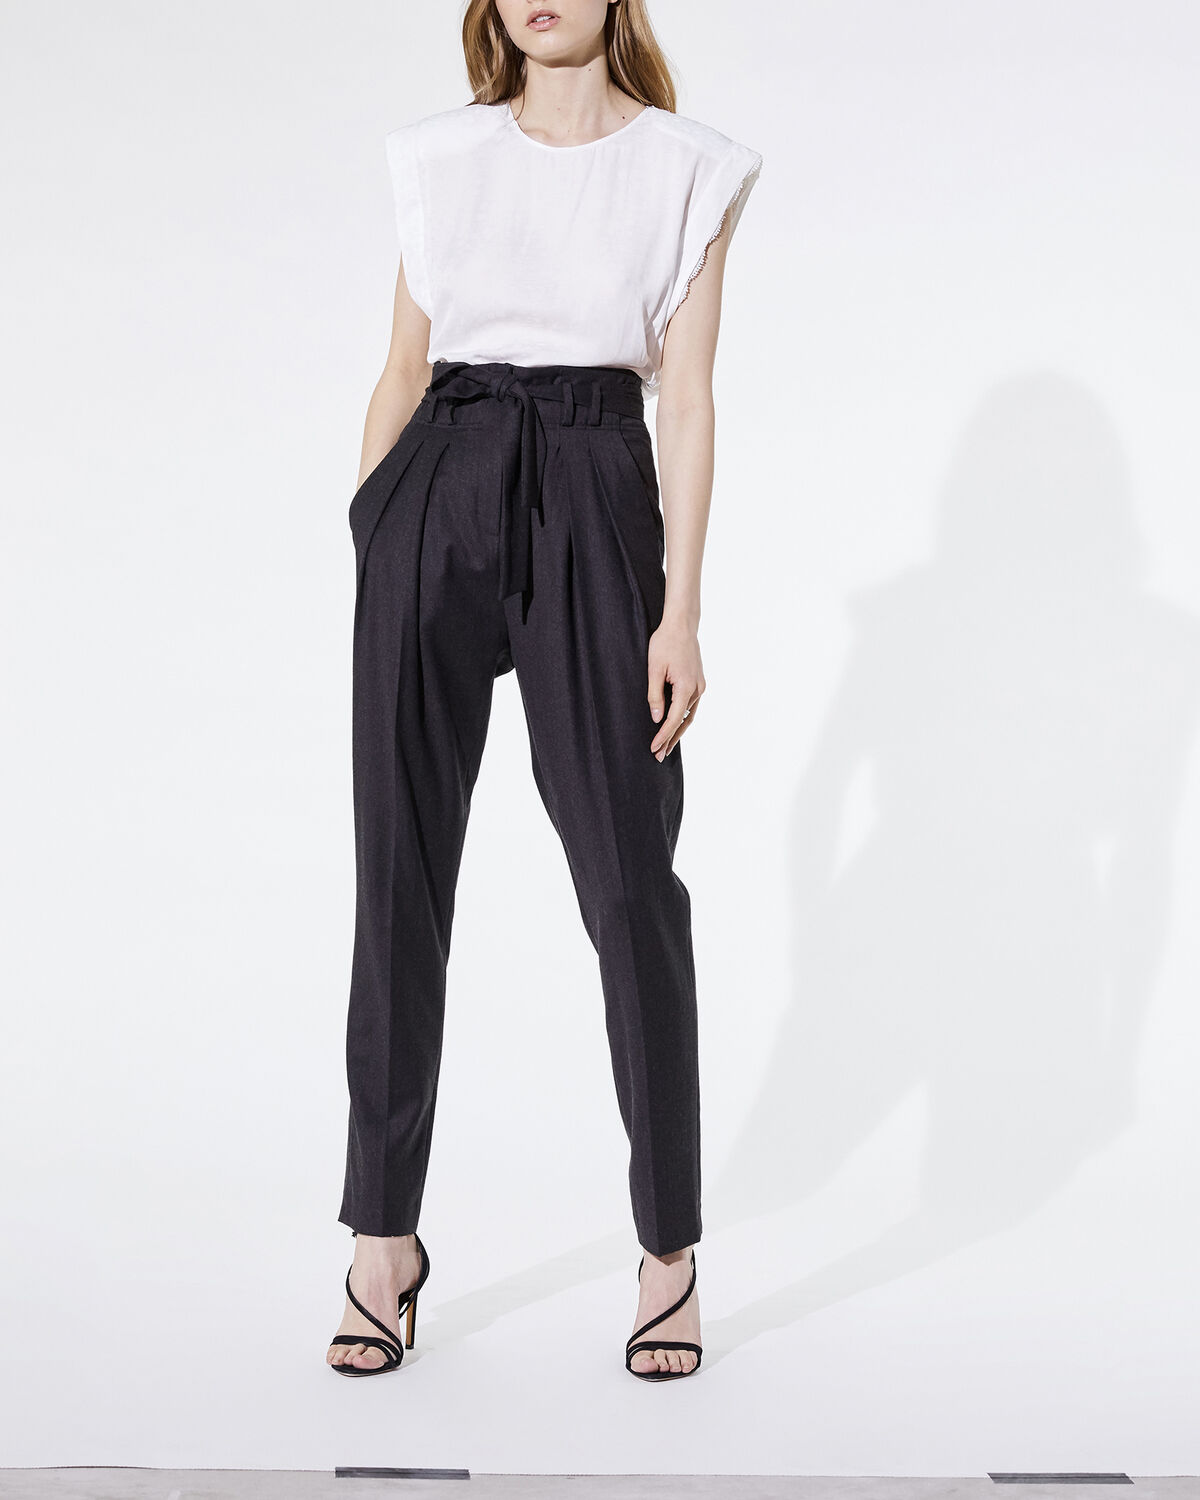 Marloa Trousers Anthracite by IRO Paris